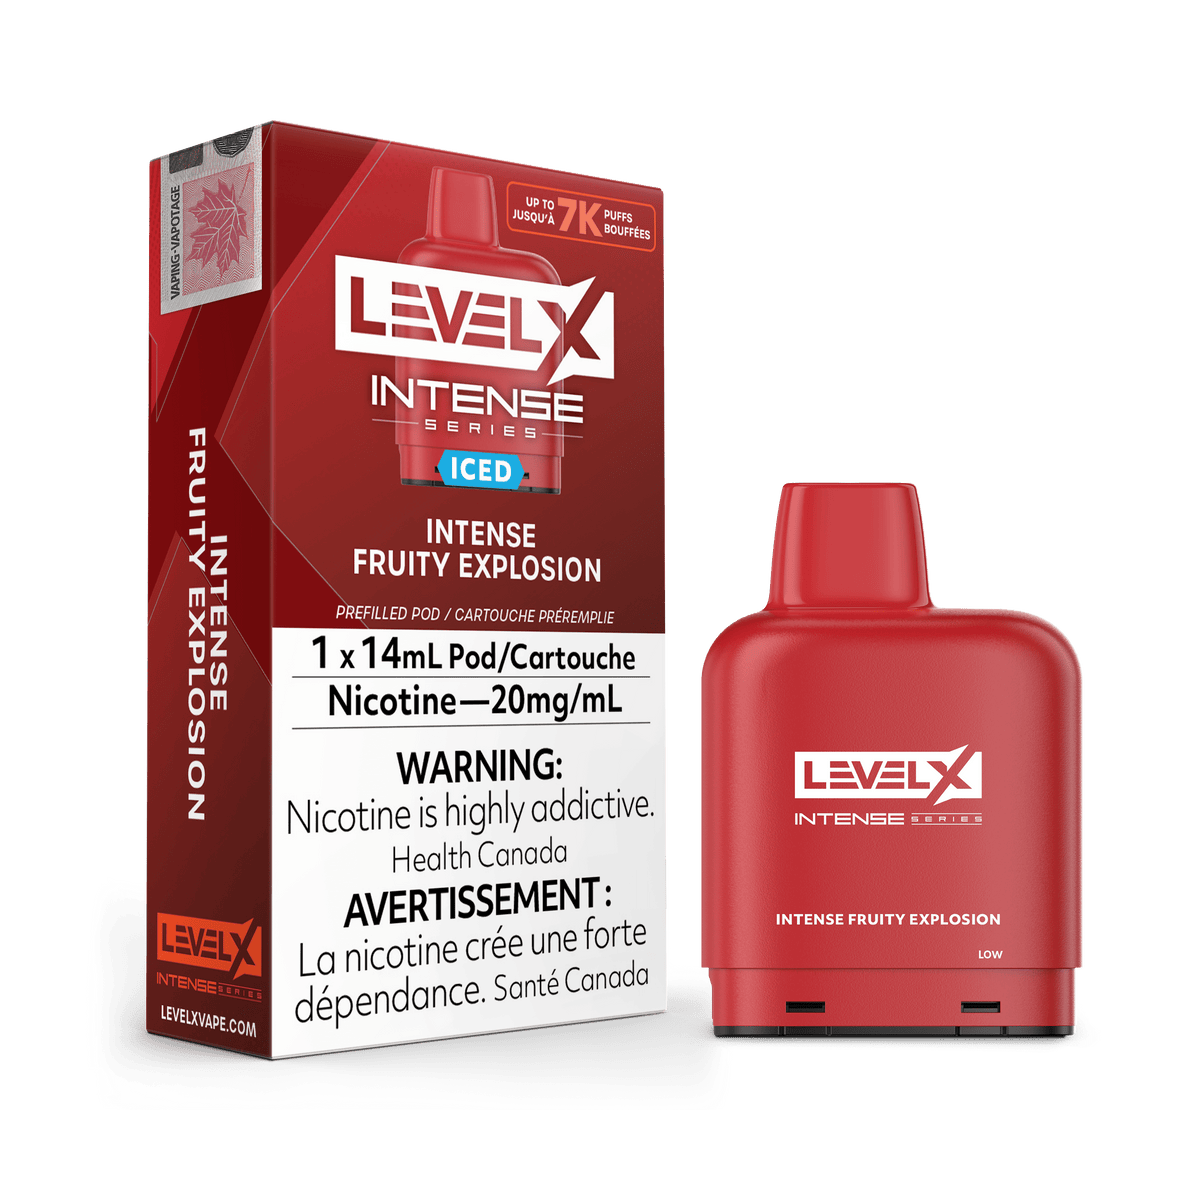 Level X Intense Series Pod - Intense Fruity Explosion available on Canada online vape shop